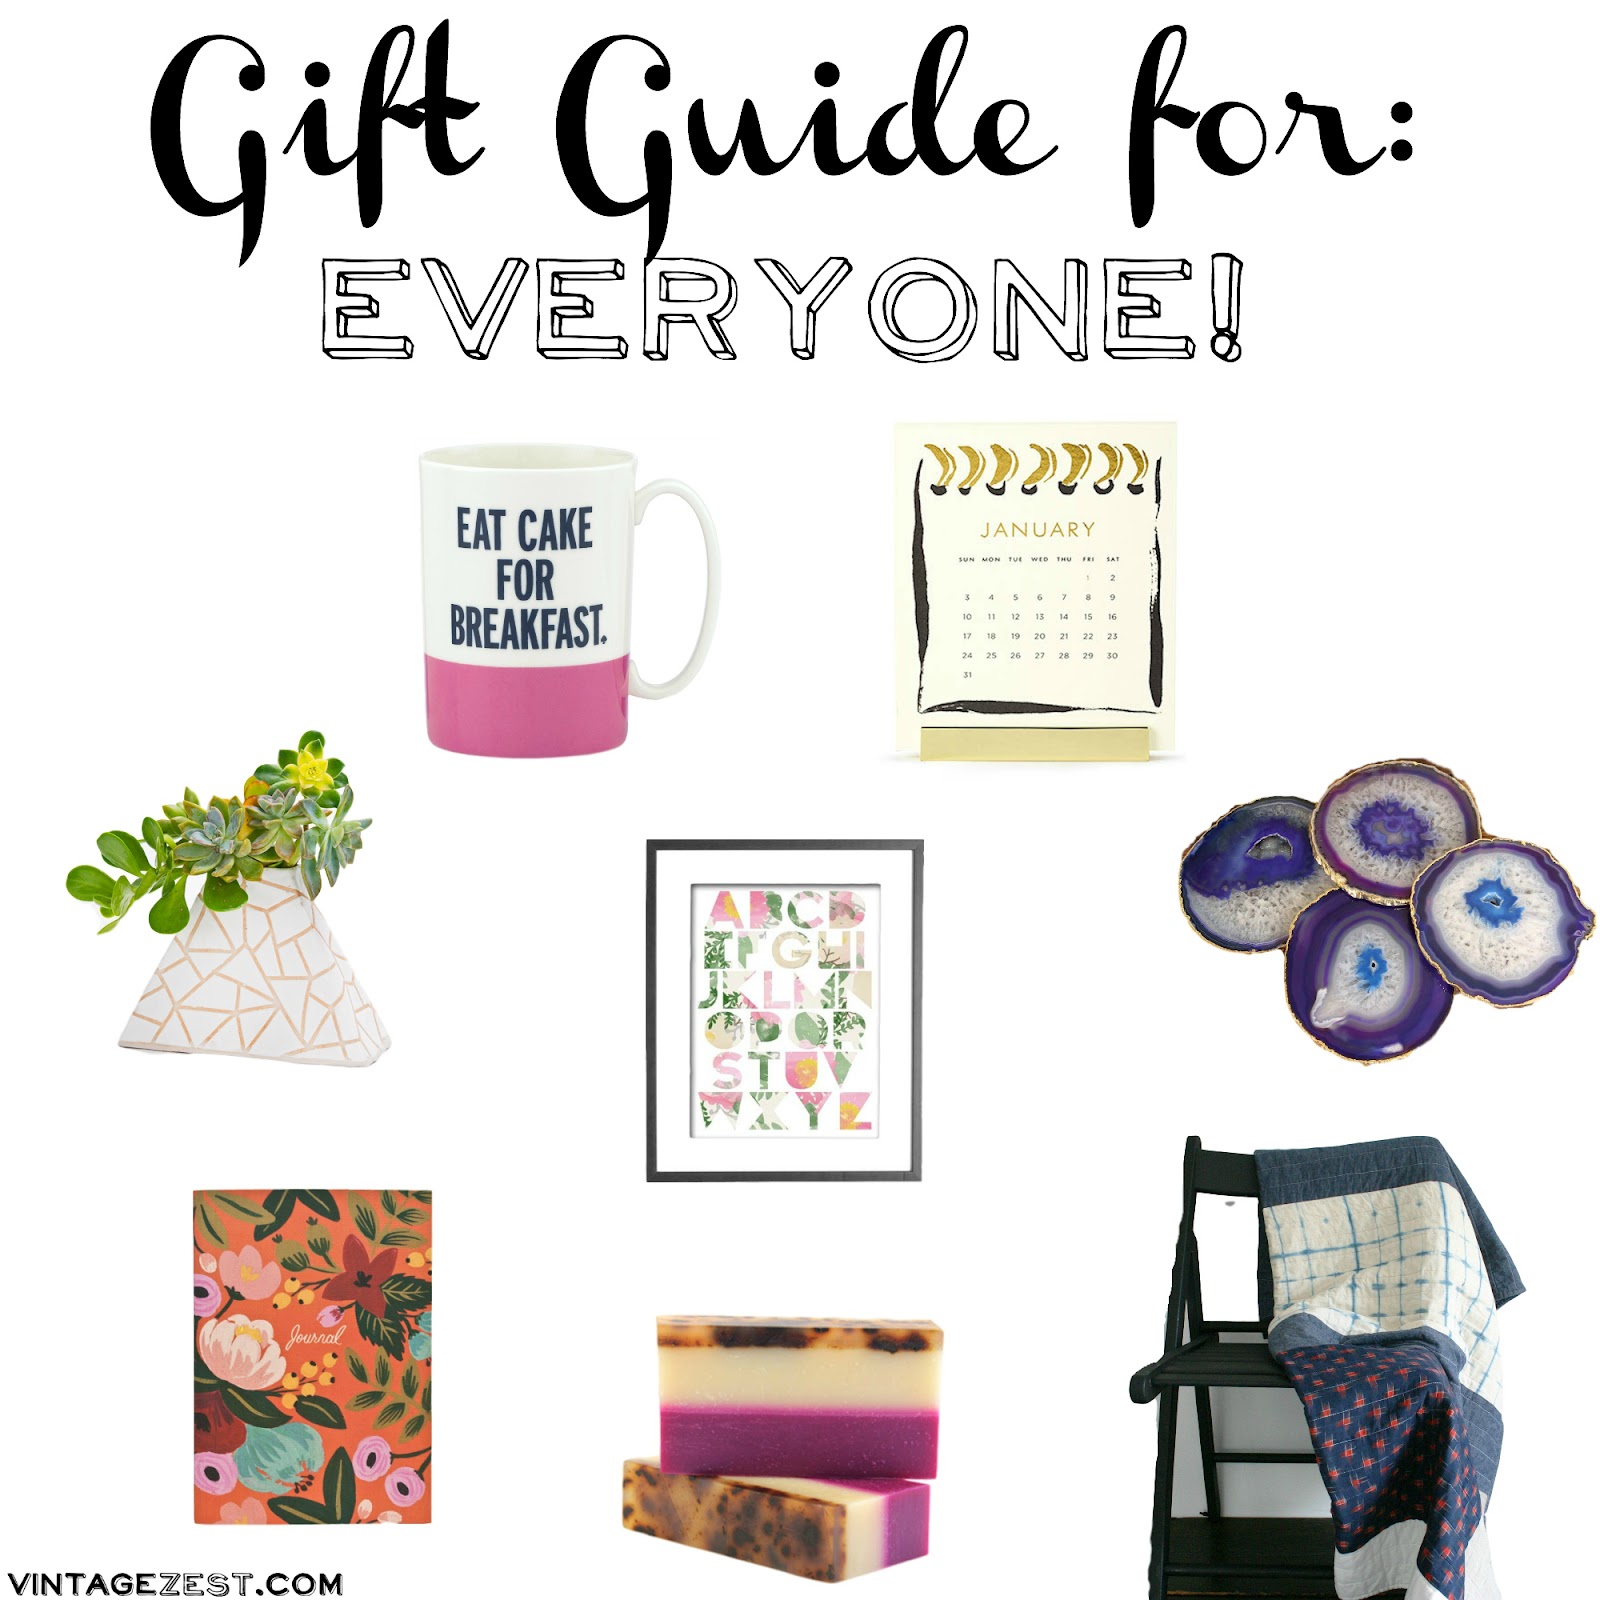 Gift Guide for Everyone: Neighbors, Coworkers, and More!